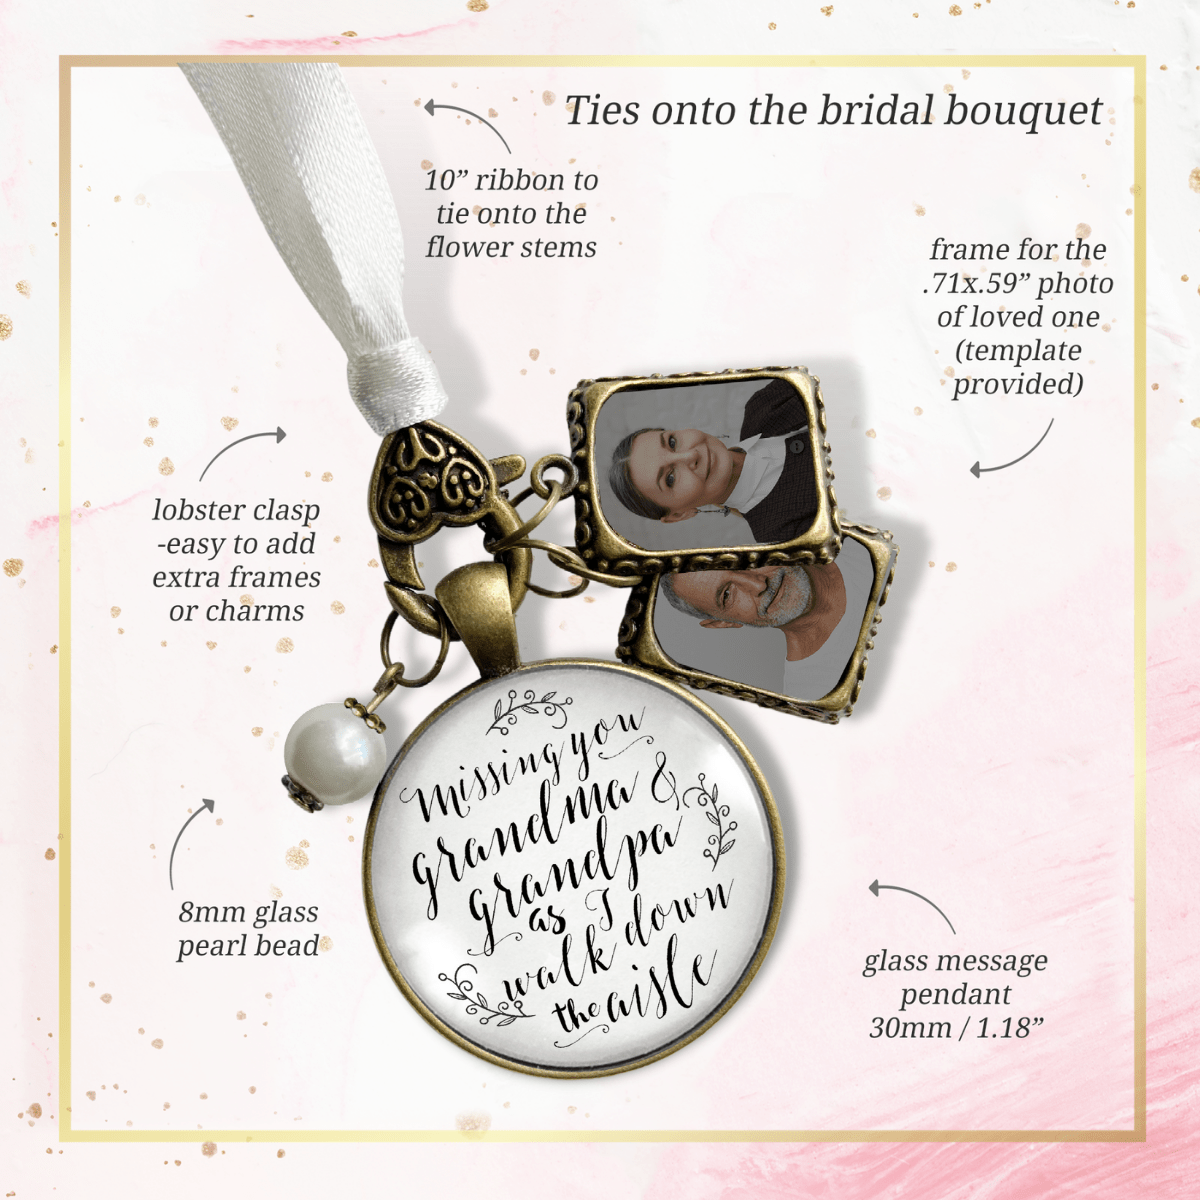 Bouquet Charm Bridal Memorial Missing Grandma Grandpa Wed Day White Bronze 2 Frames - Gutsy Goodness Handmade Jewelry Gifts